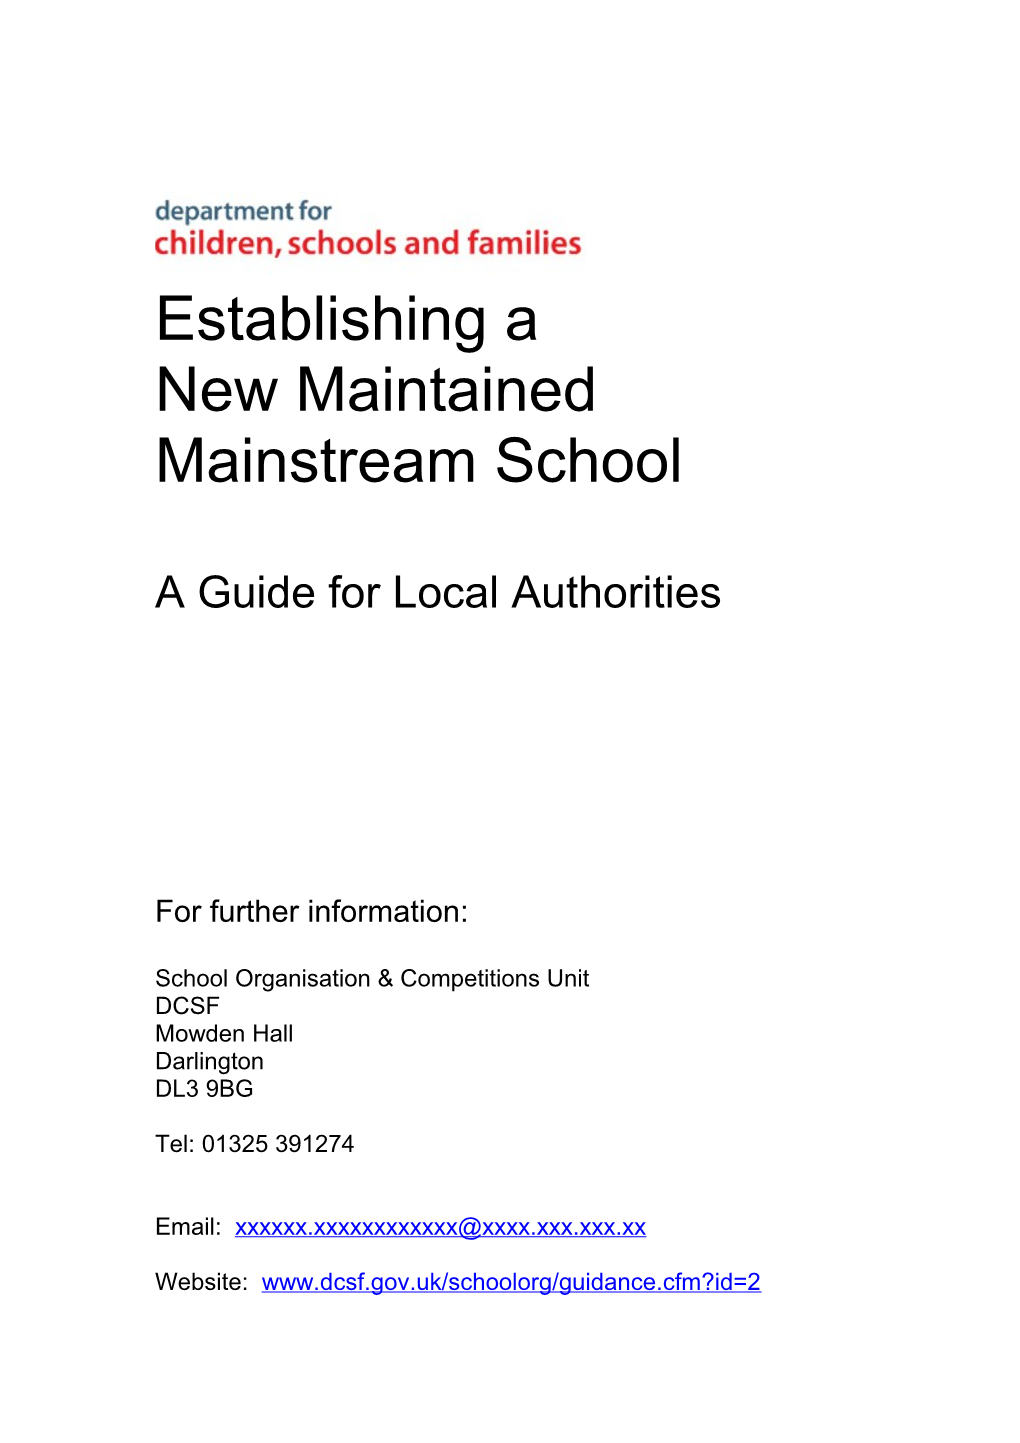 A Guide for Local Authorities